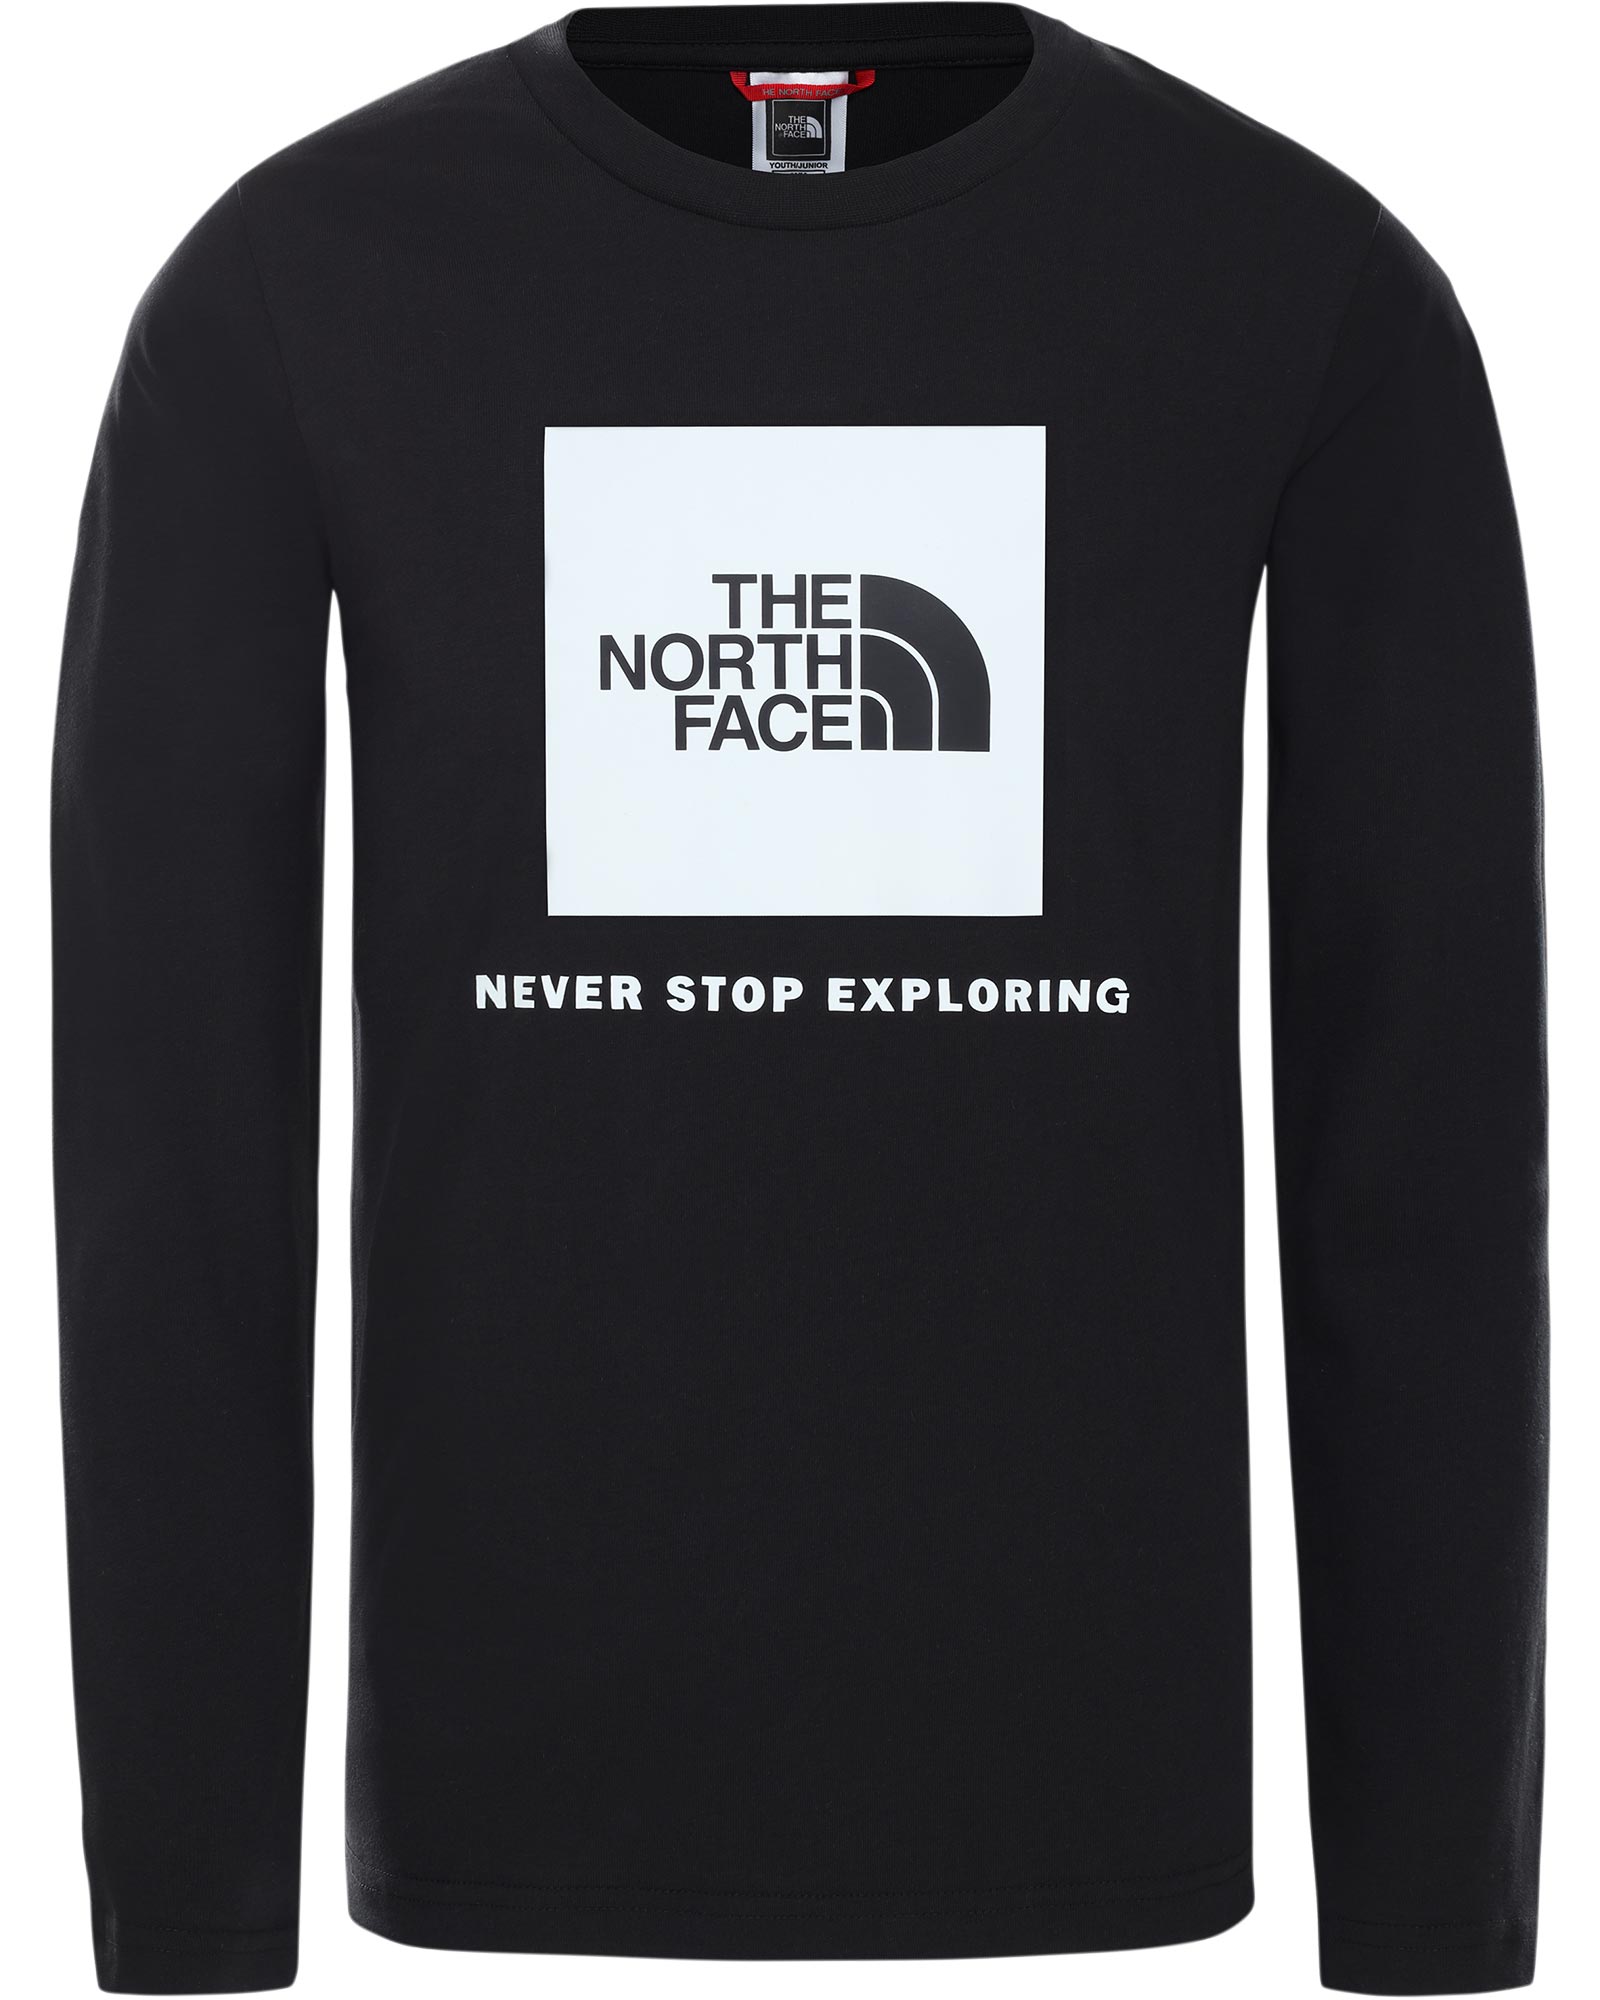 Product image of The North Face Box Kids' Long Sleeve T-Shirt